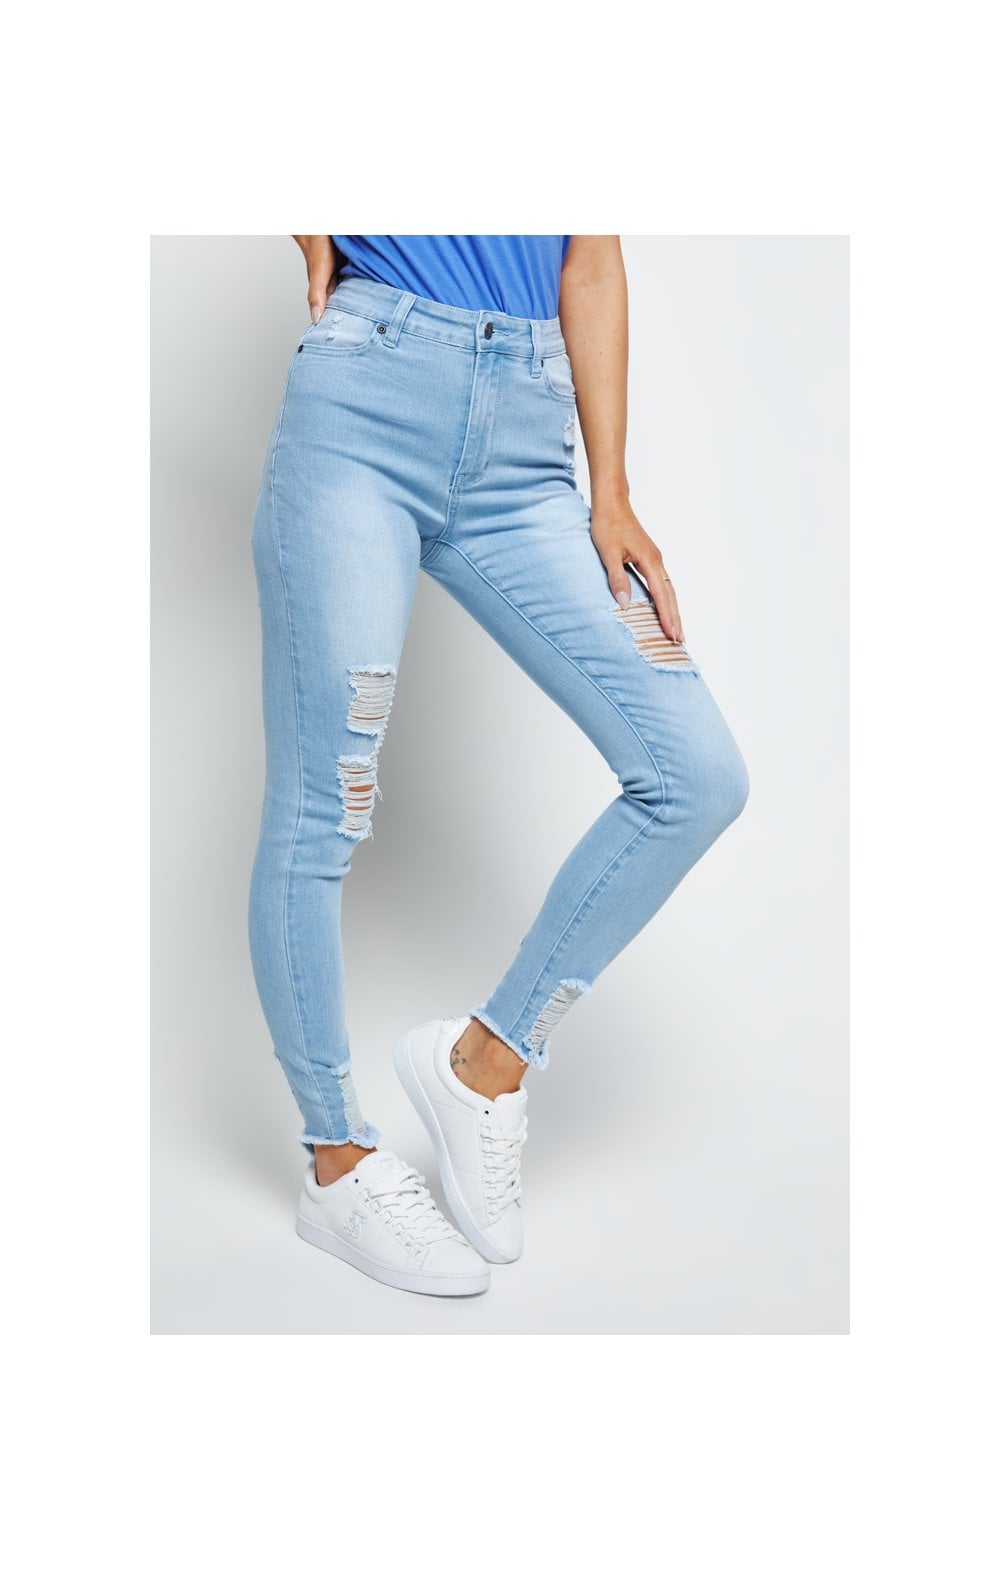 Load image into Gallery viewer, SikSilk Distressed Skinny Jeans - Ice Blue